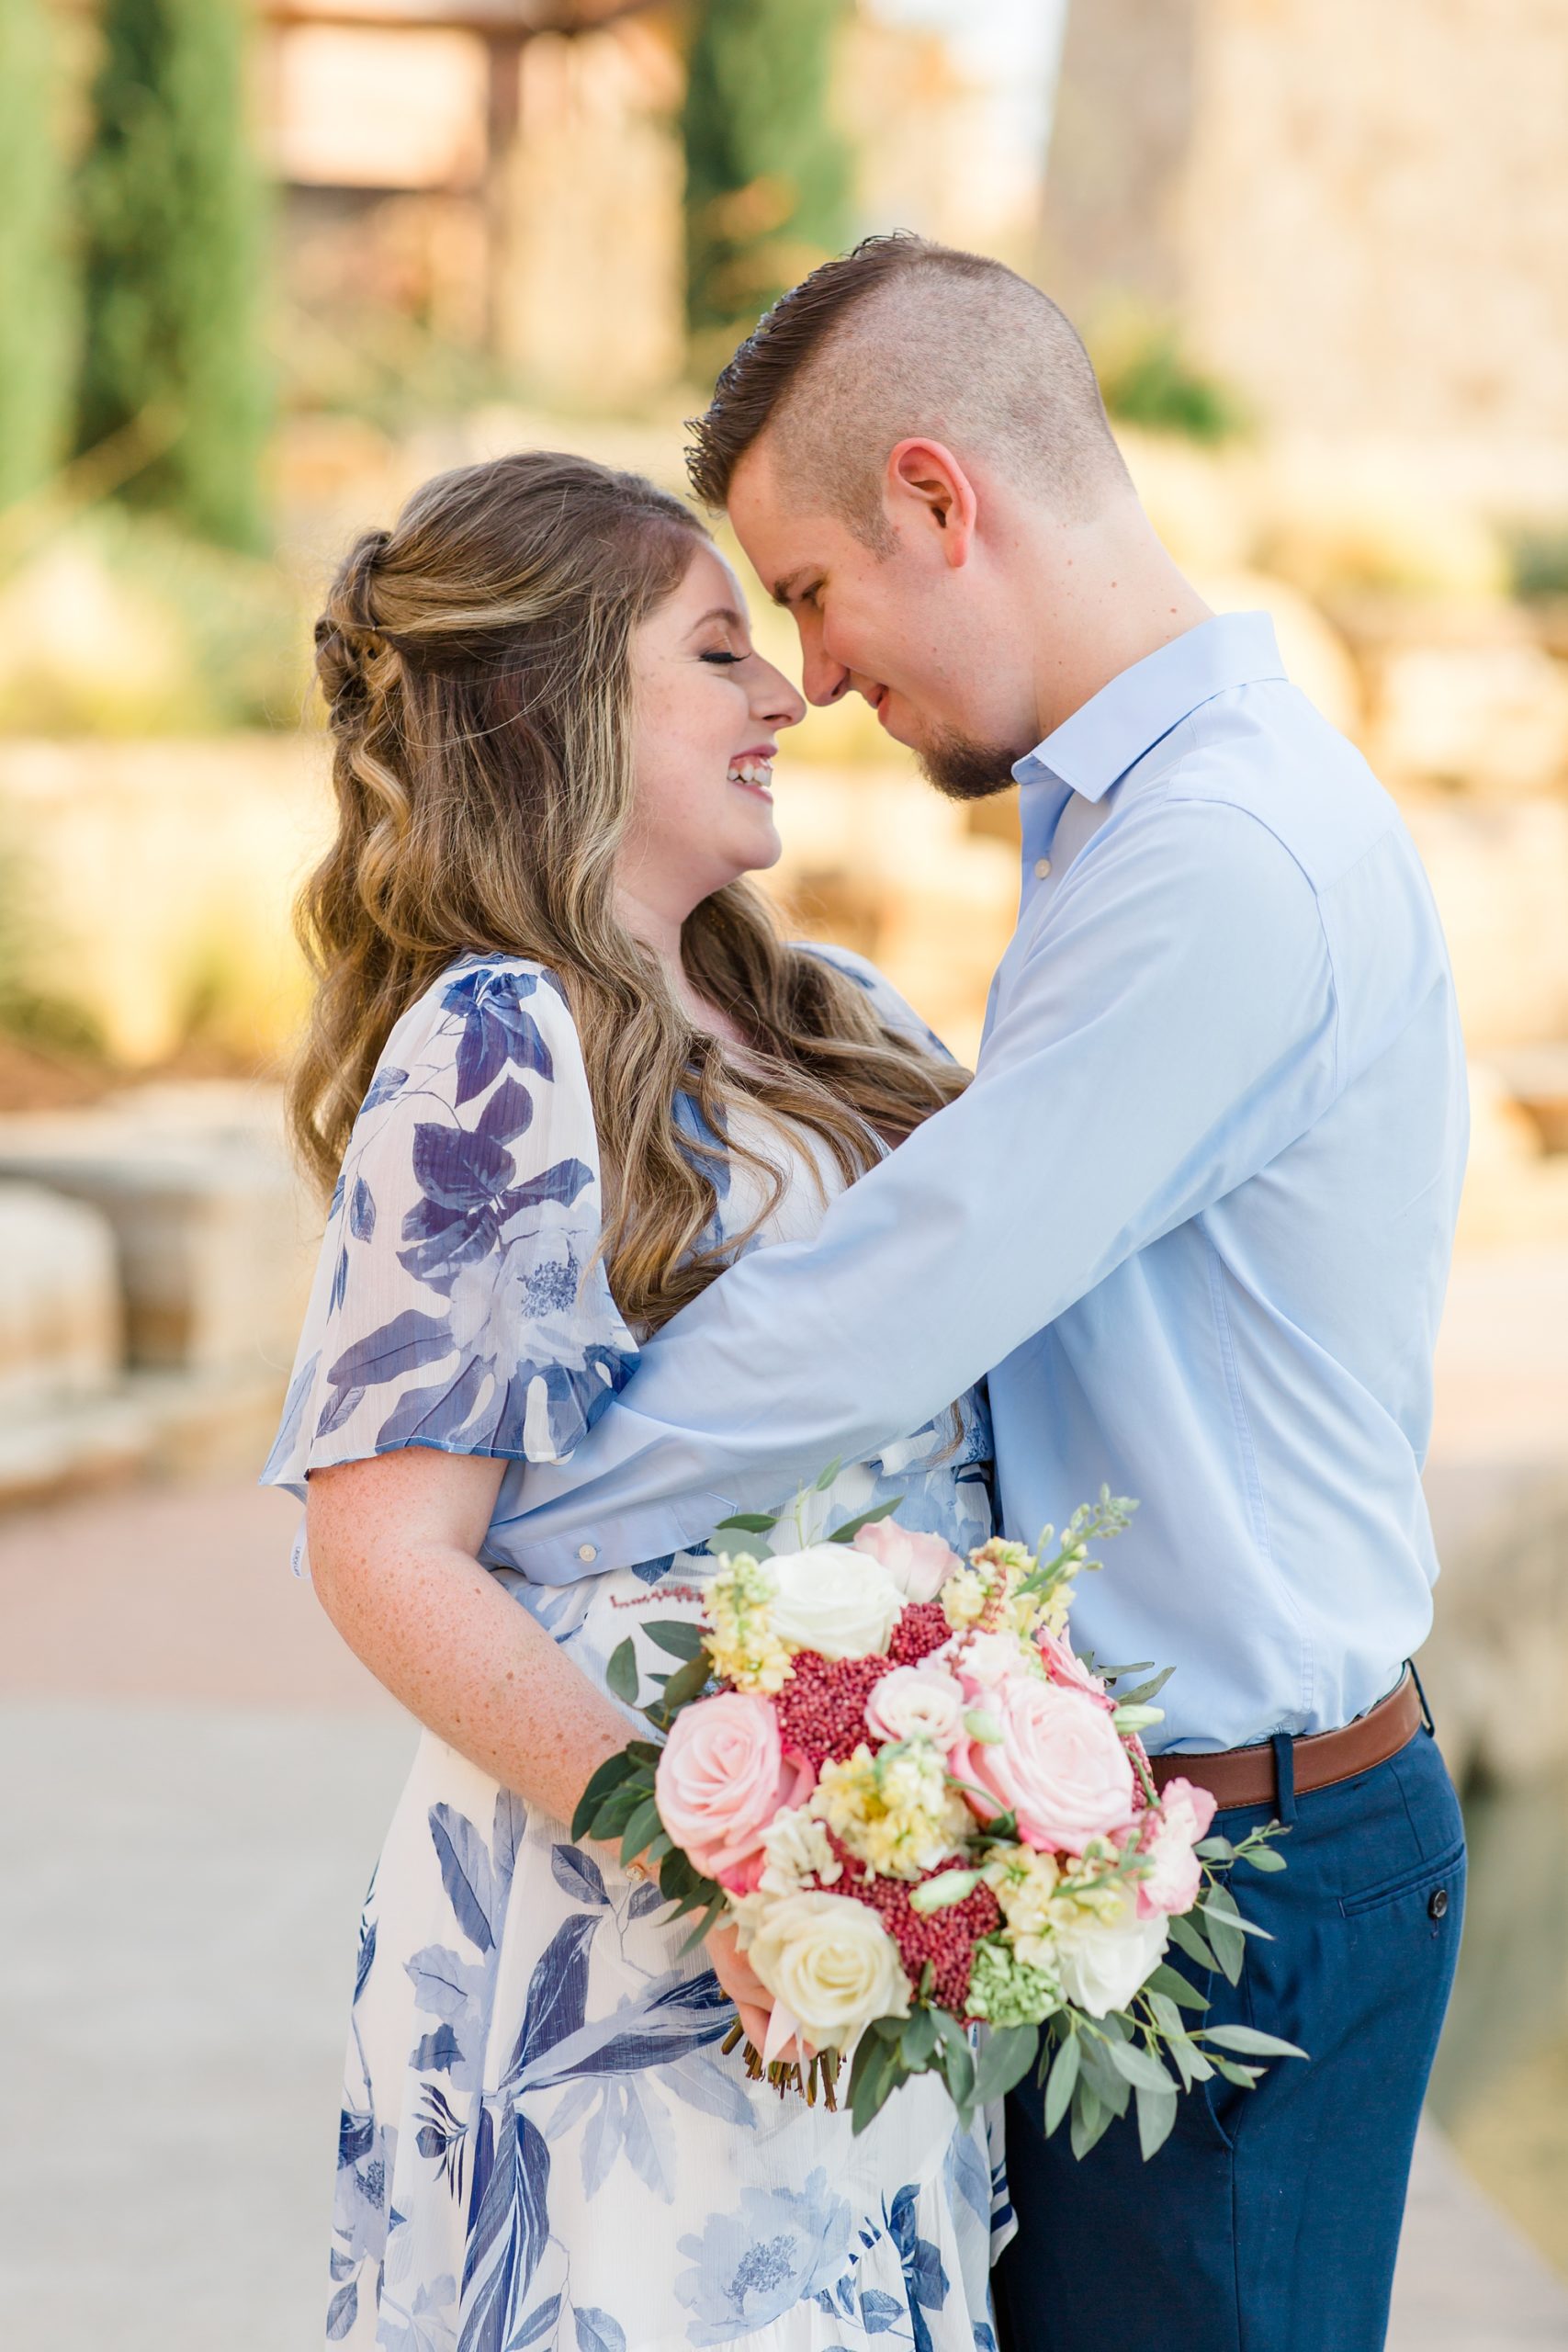 Dallas TX engagement session with bride-to-be holding bouquet